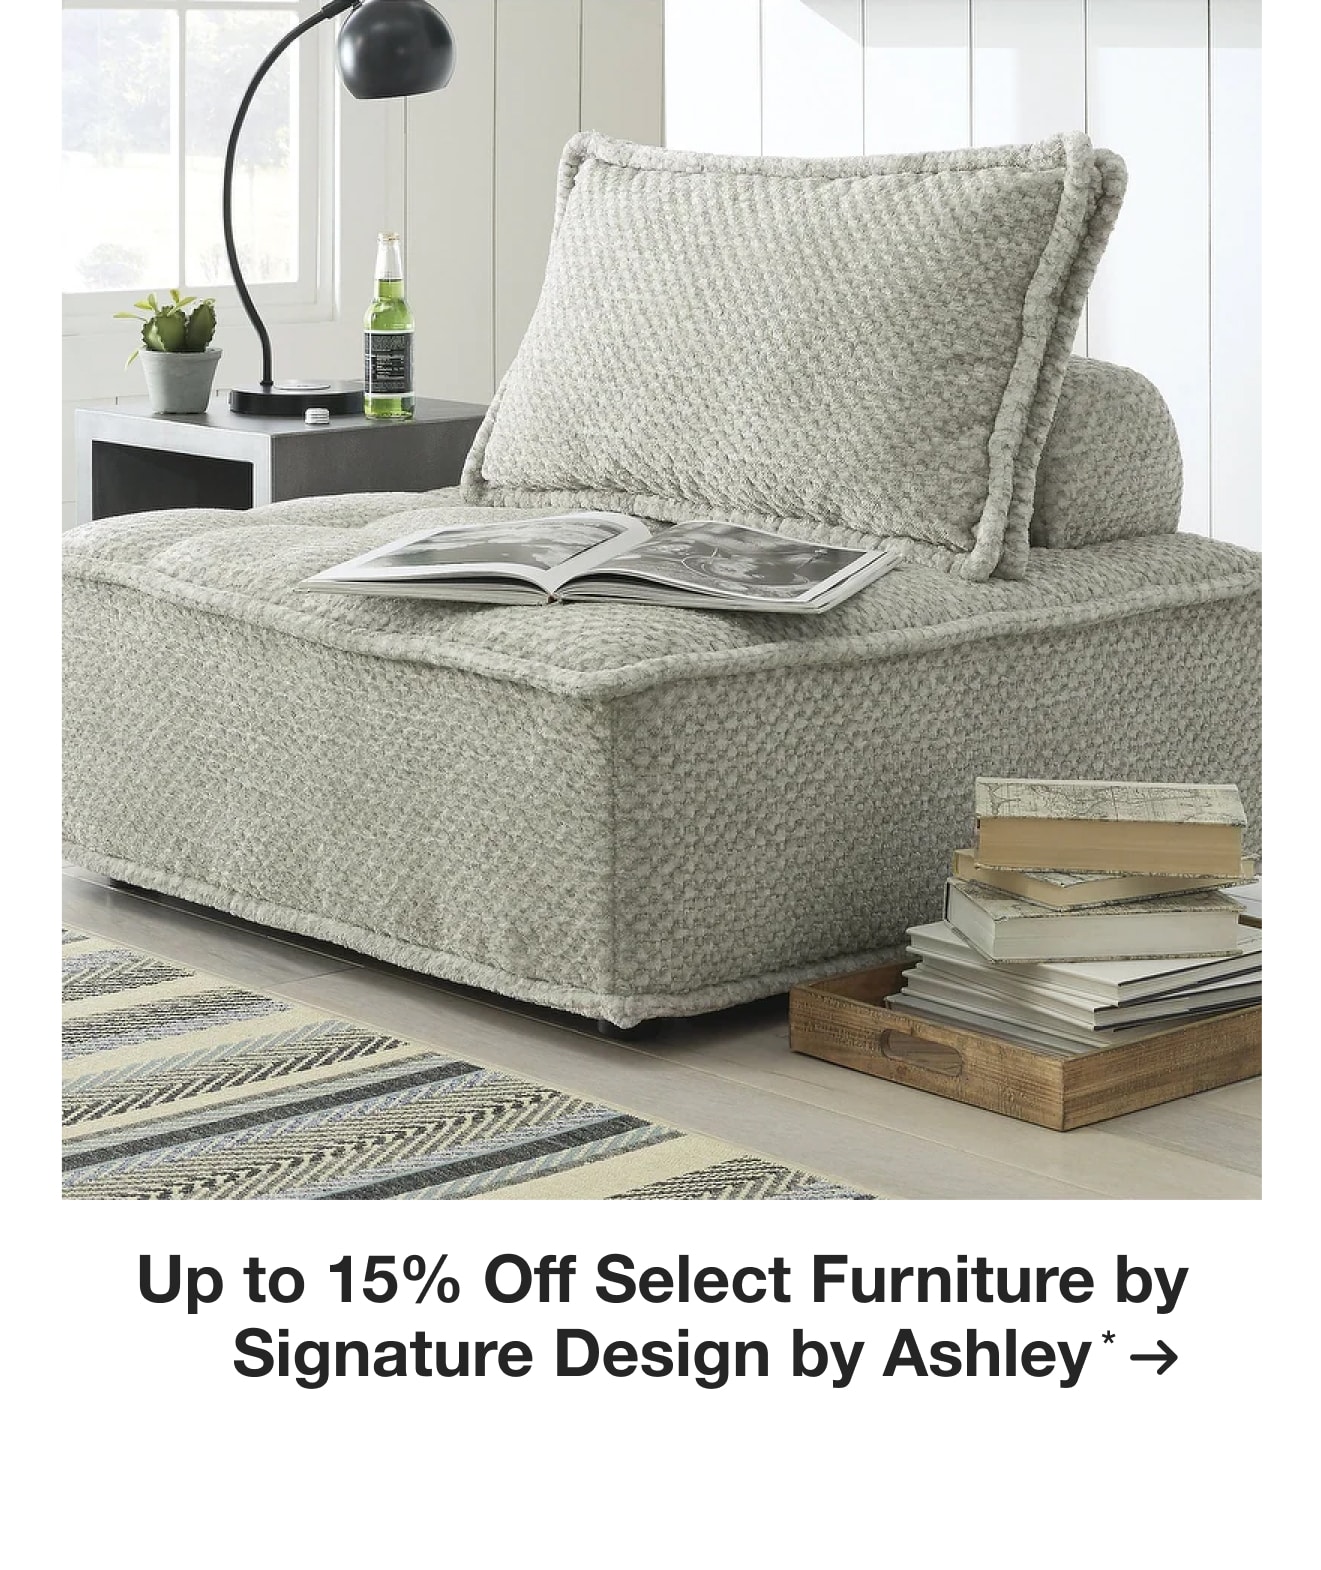 Up to 15% Off Select Furniture by Signature Design by Ashley*